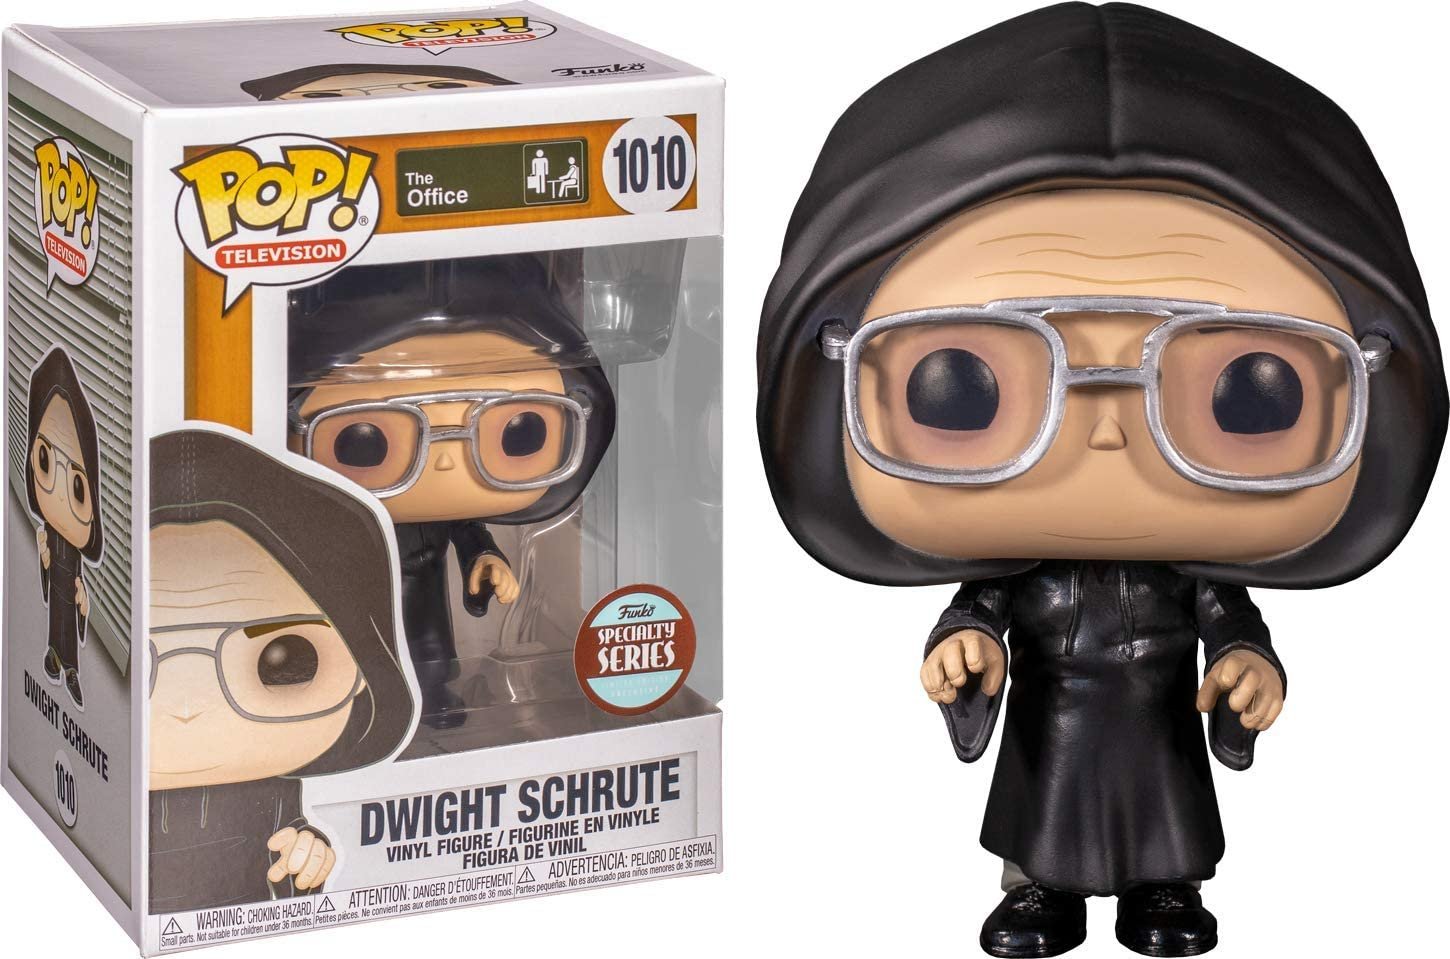 Funko Pop! TV Specialty Series Exclusive: The Office - Dwight as Dark Lord